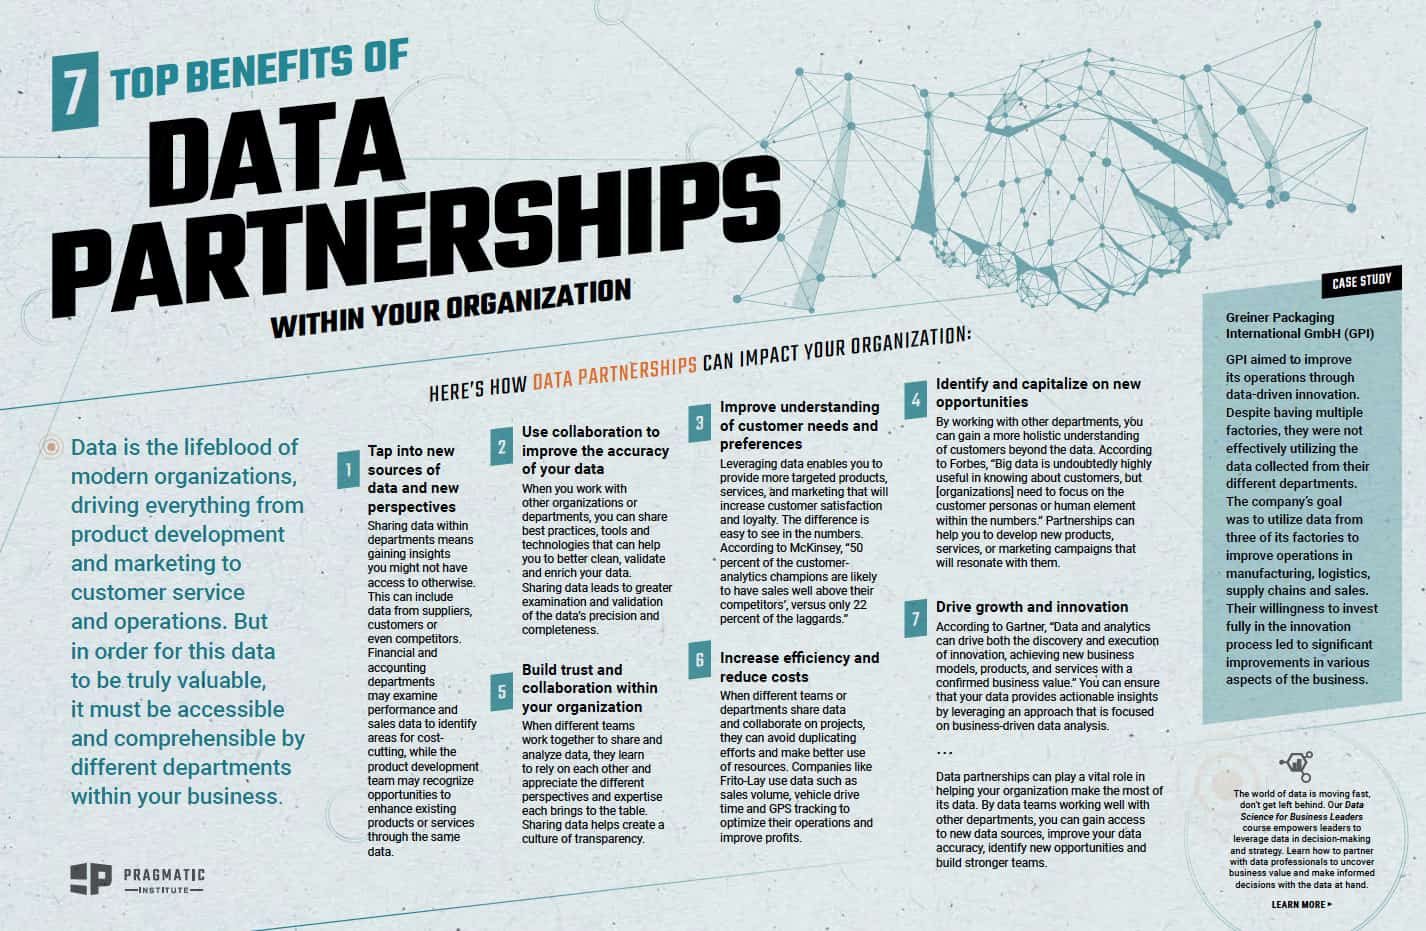 7 Top Benefits of Data Partnerships Within Your Organization